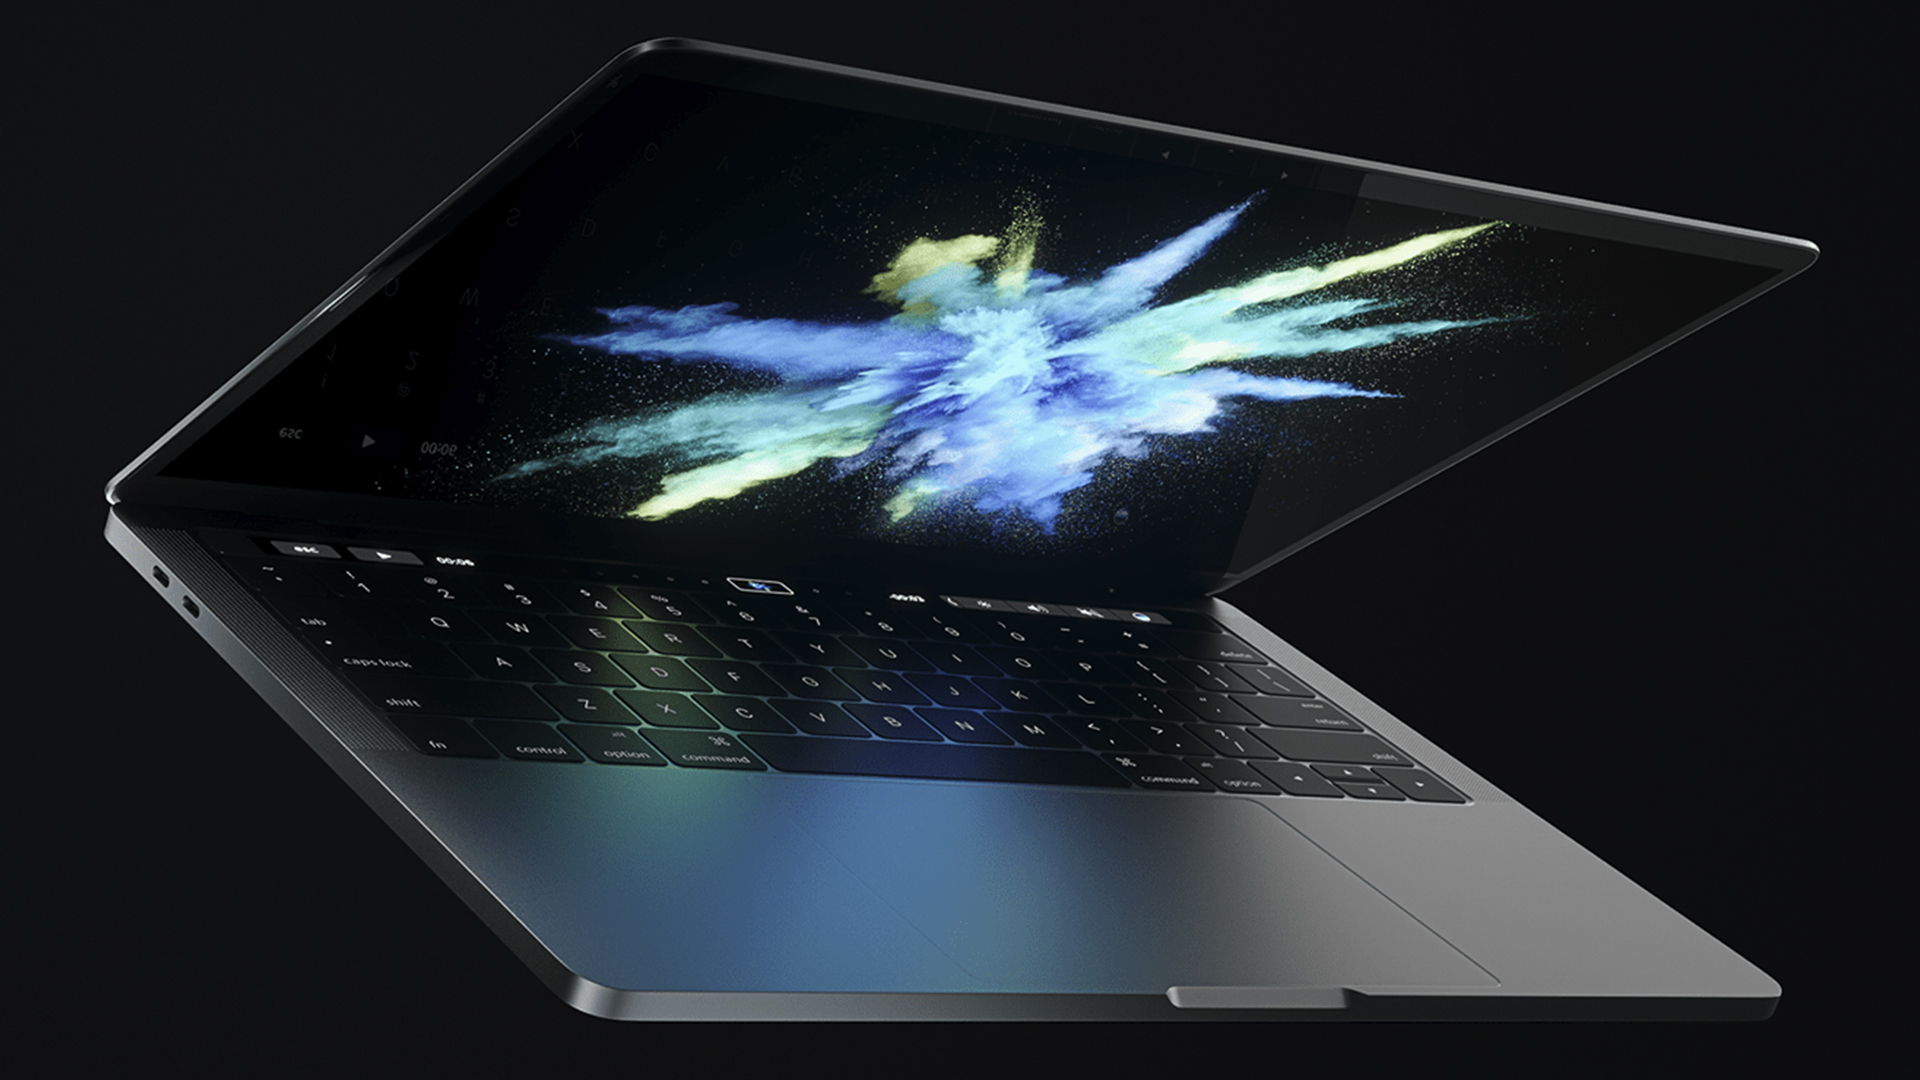 Apple's new MacBook Pro could sport a shocking iPhone-inspired design